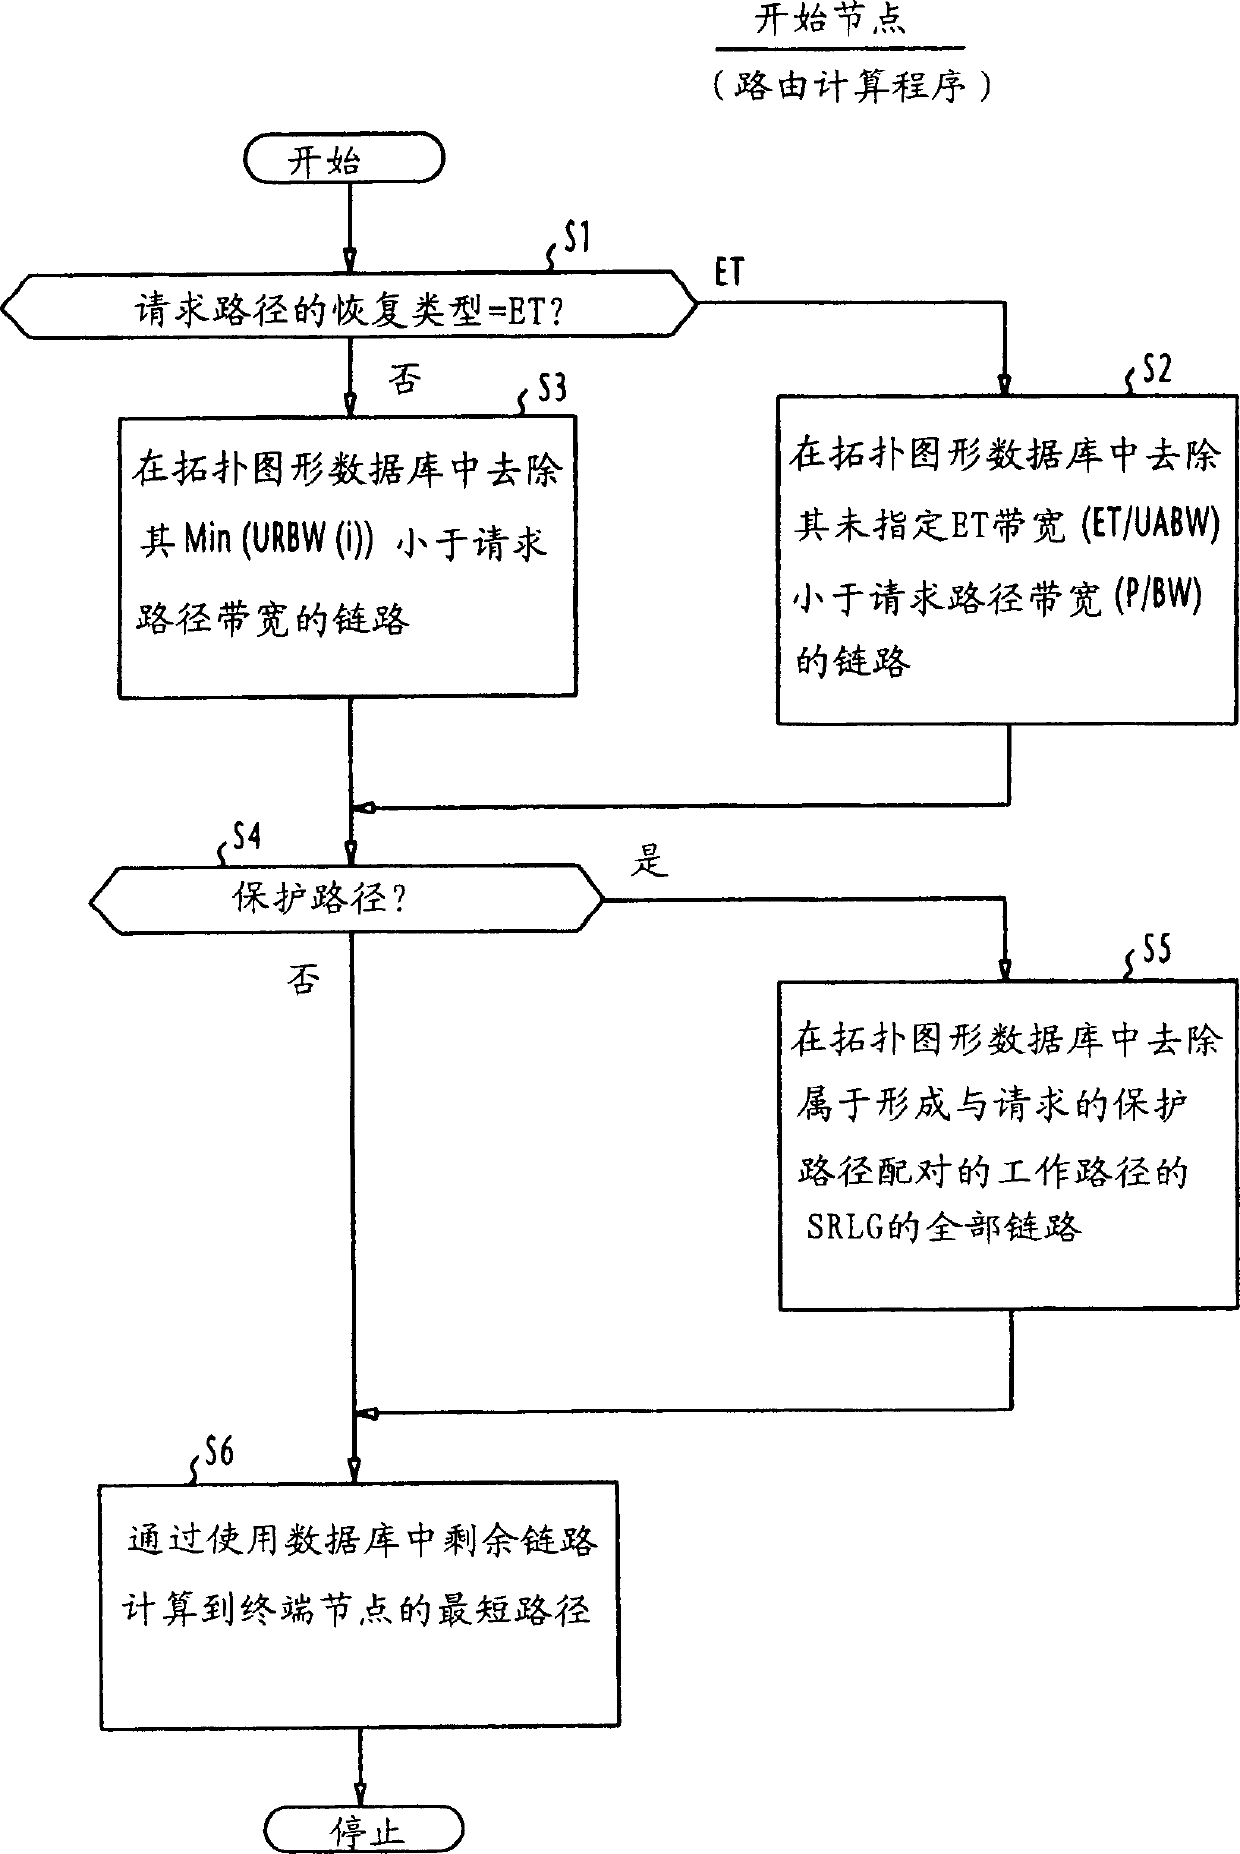 Method for establishing recovery type path of different faults in one communication network